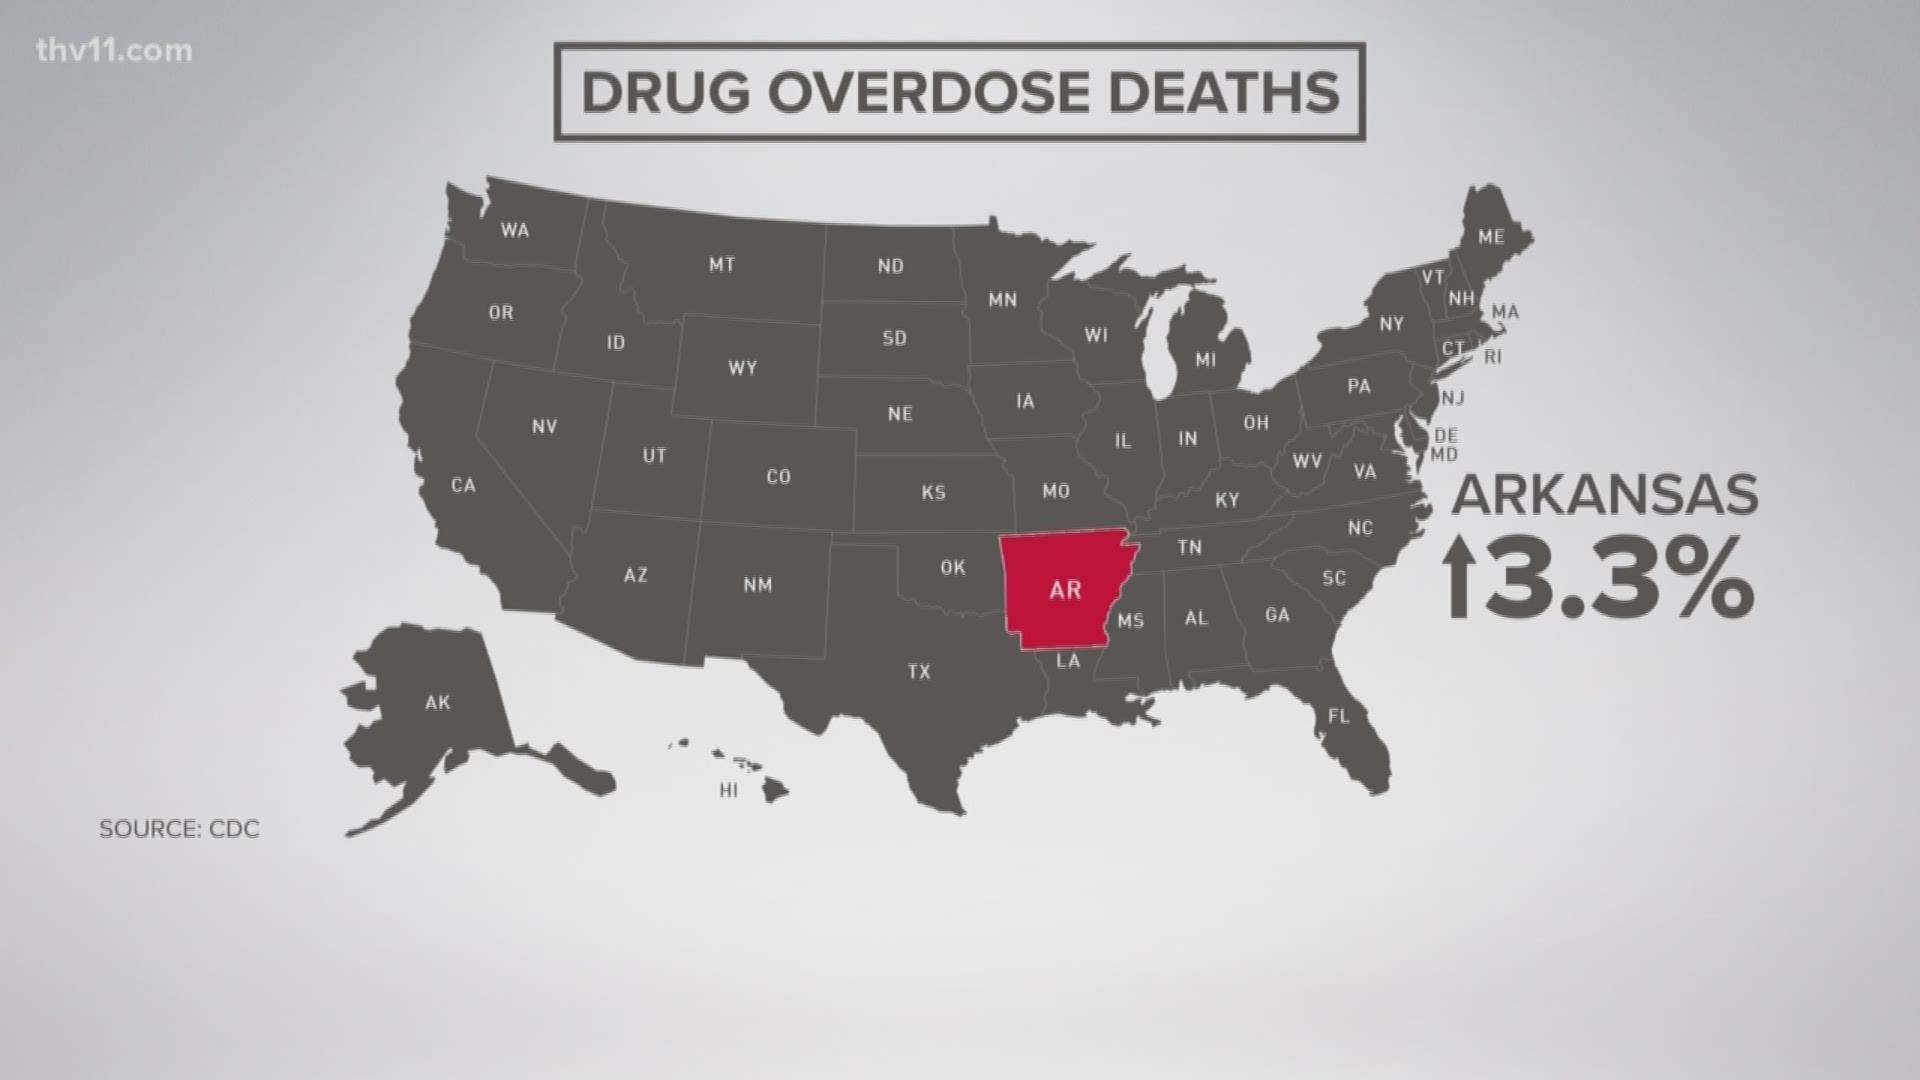 Despite the Narcan results in our state, new CDC numbers show that overdose deaths are up in Arkansas through January of this year.